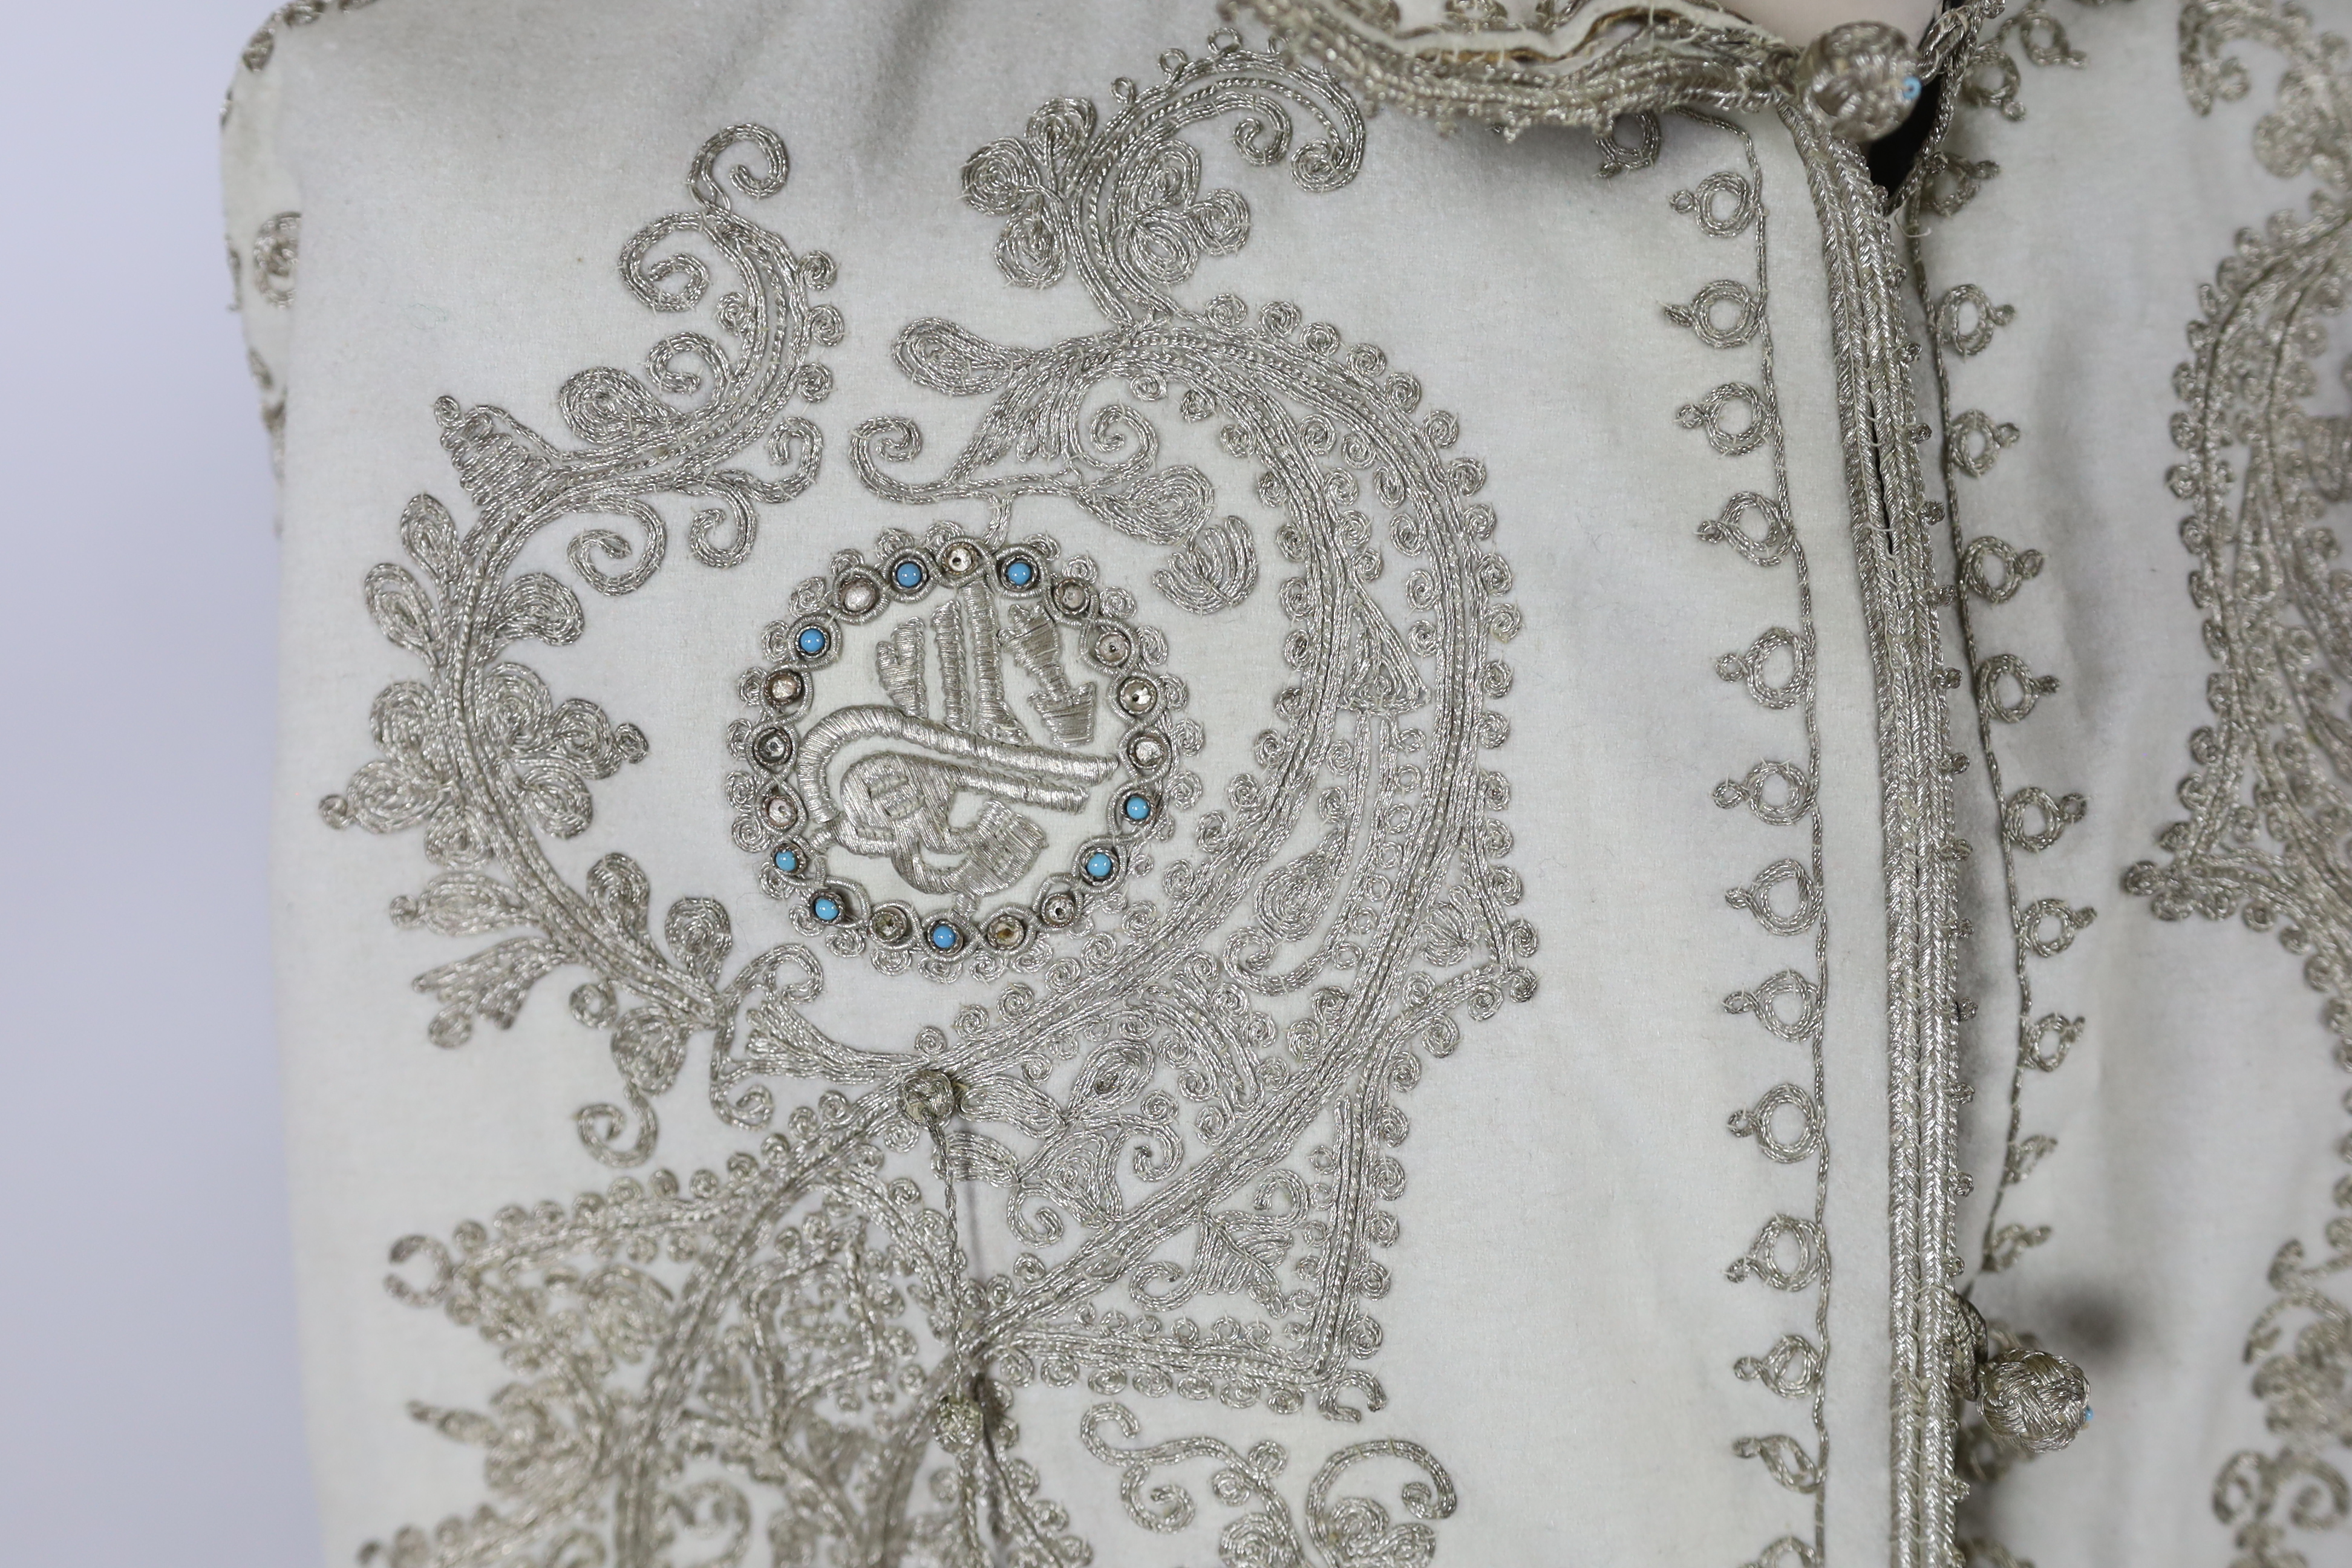 A 19th century Indian fine cream wool embroidered cape, probably made for the European market, embroidered in panels of silver metallic thread in an ornate vertical design with turquoise embellishments and lined in black